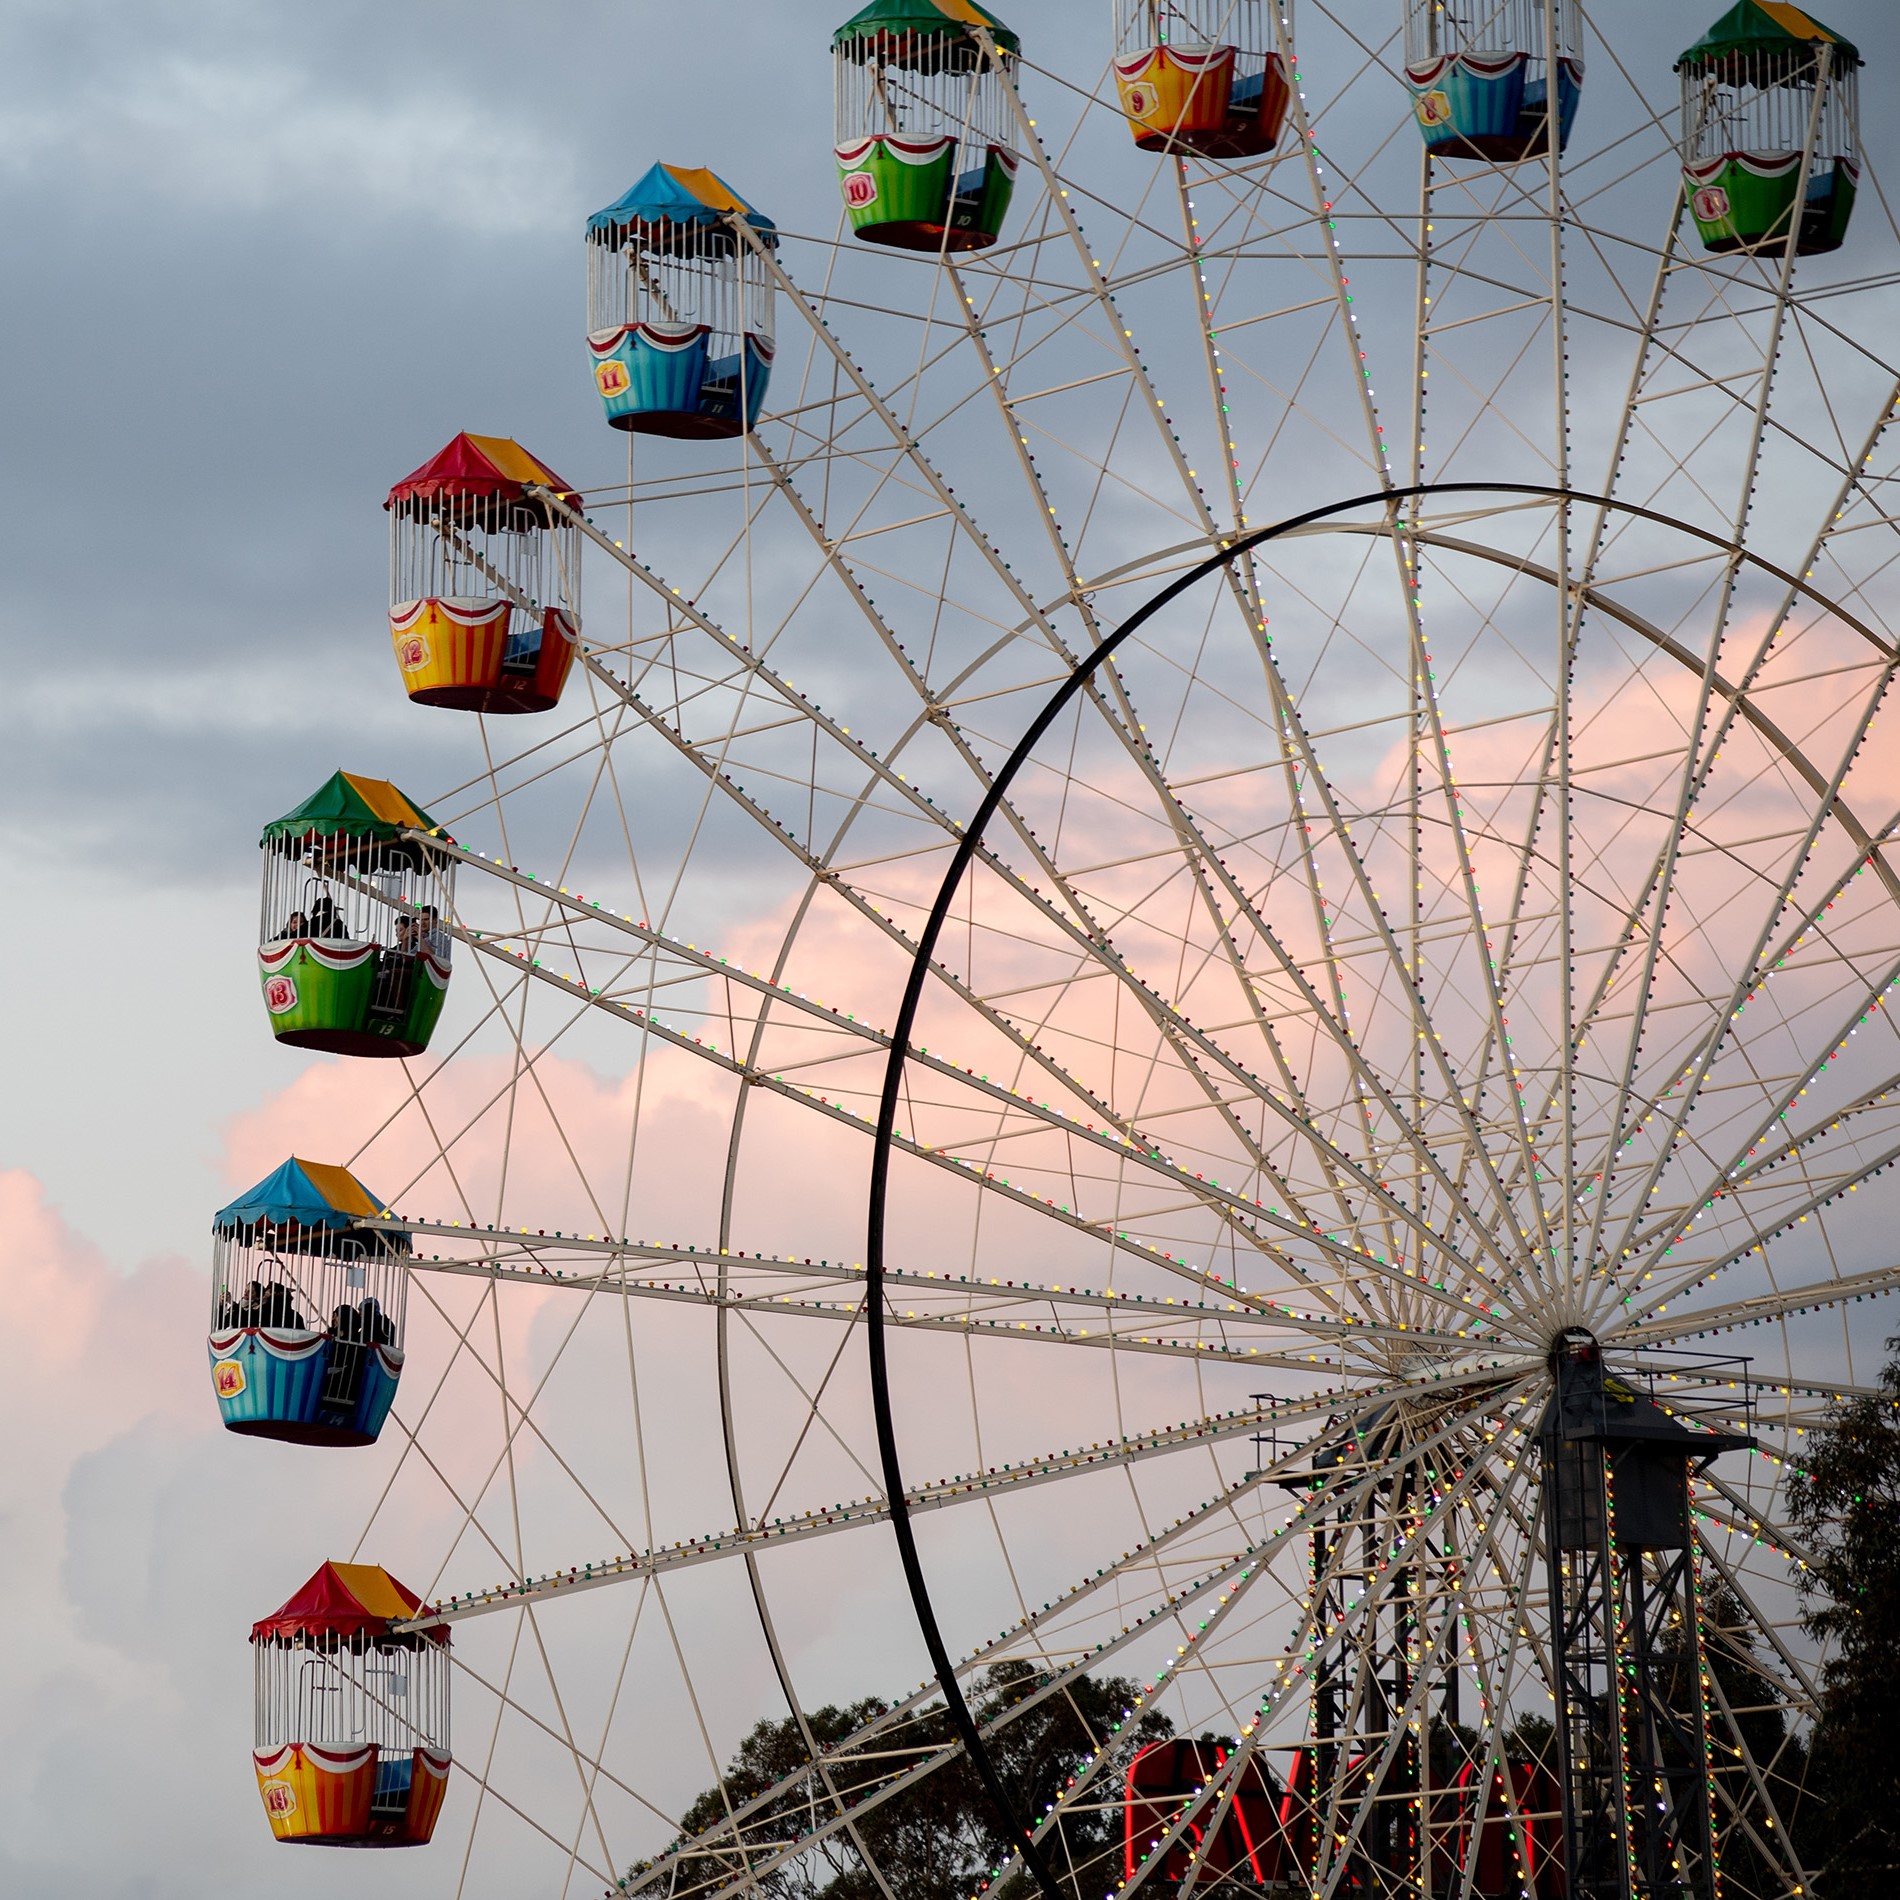 WIN 1 of 5 Family Passes To Attend The Royal Adelaide Show!